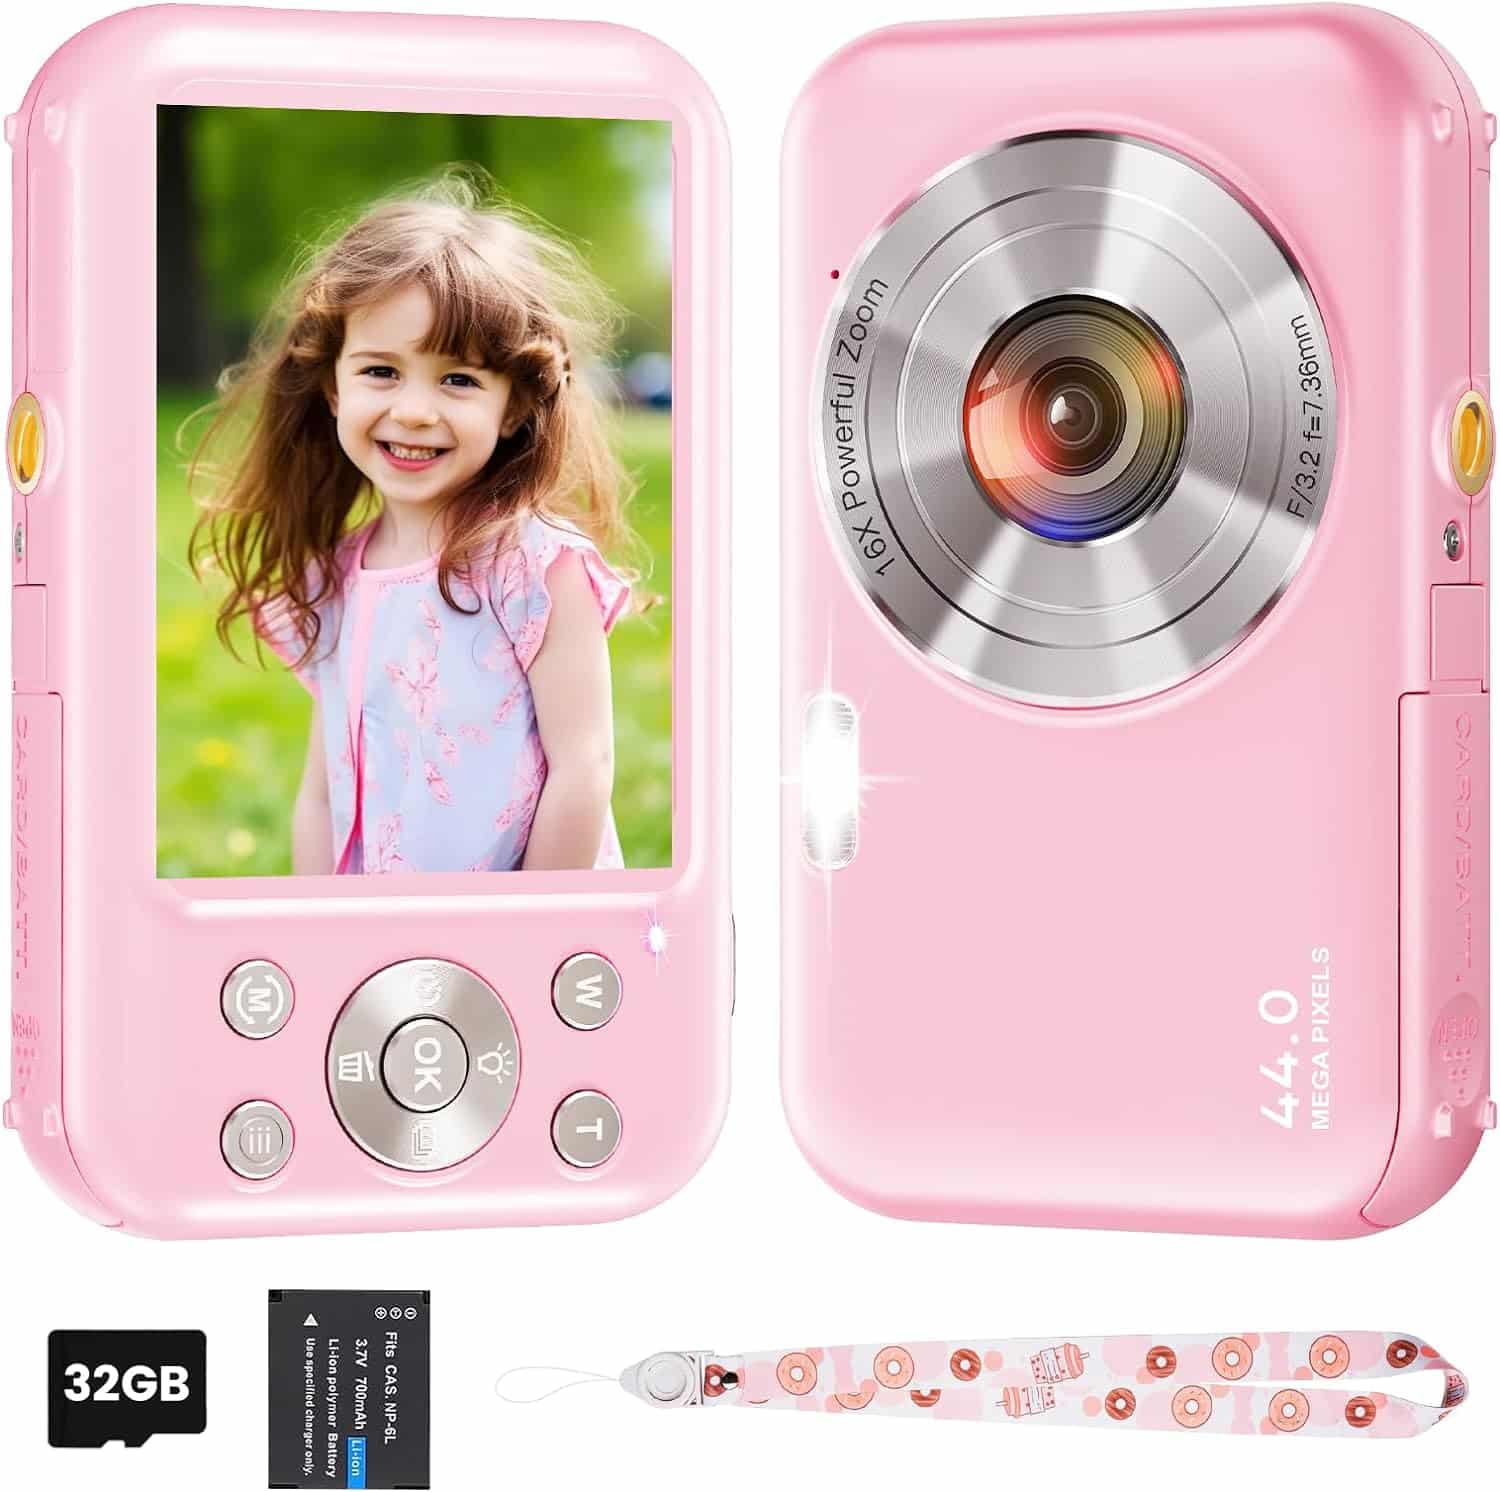 Digital Camera, Kids Camera with 32GB Card, FHD 1080P 44MP Vlogging Camera, 16X Zoom Point and Shoot Digital Camera Compact Portable Rechargeable Cameras for Teens Boys Girls Students Seniors(Pink)